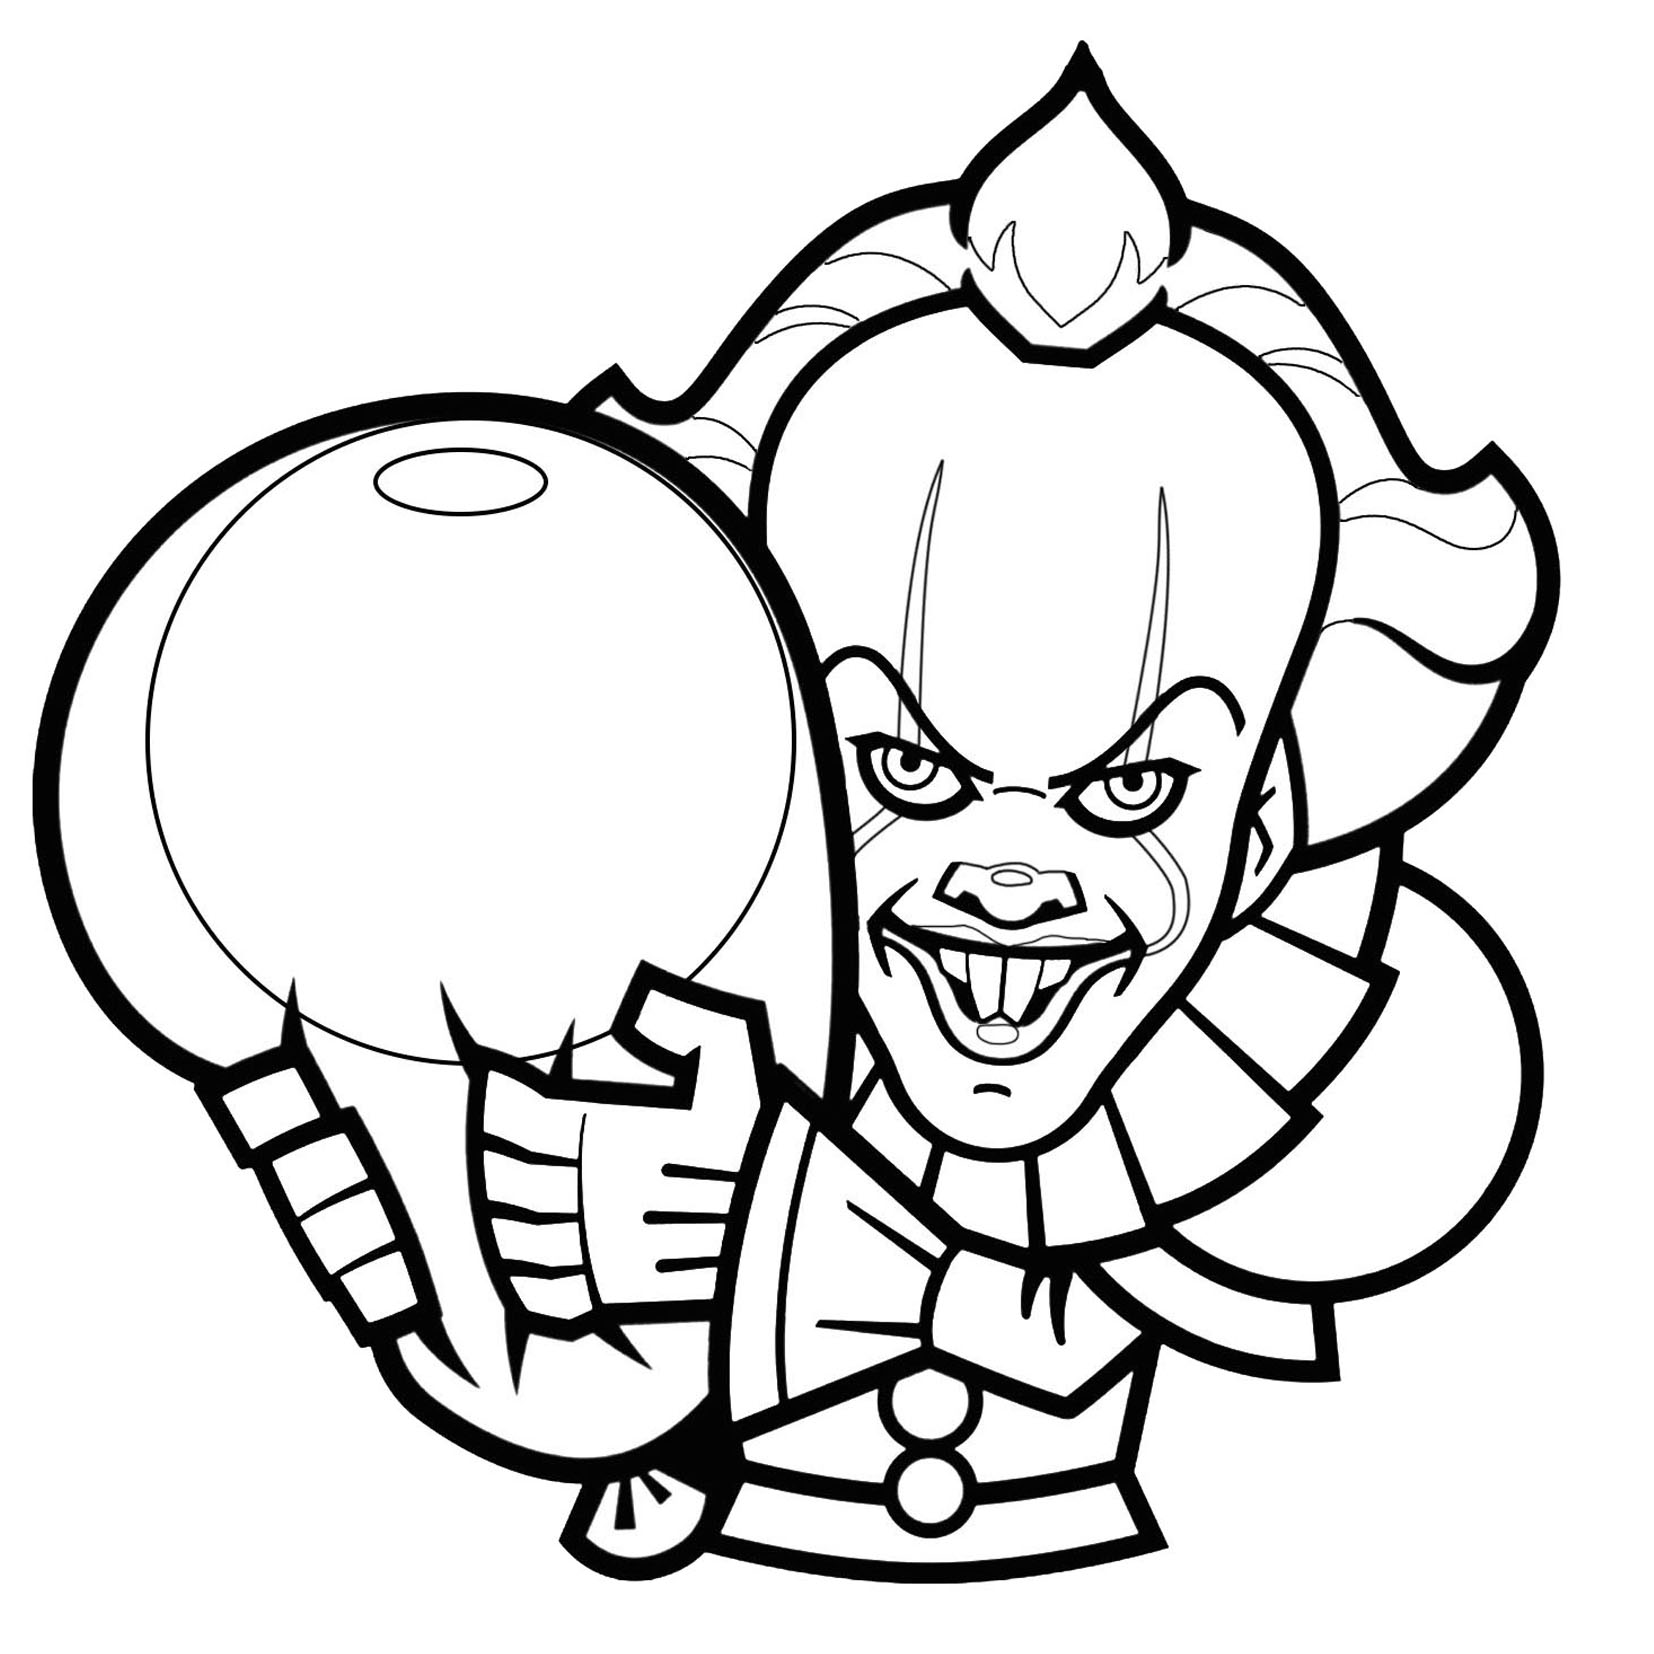 Clown of It version 2 Halloween Kids Coloring Pages